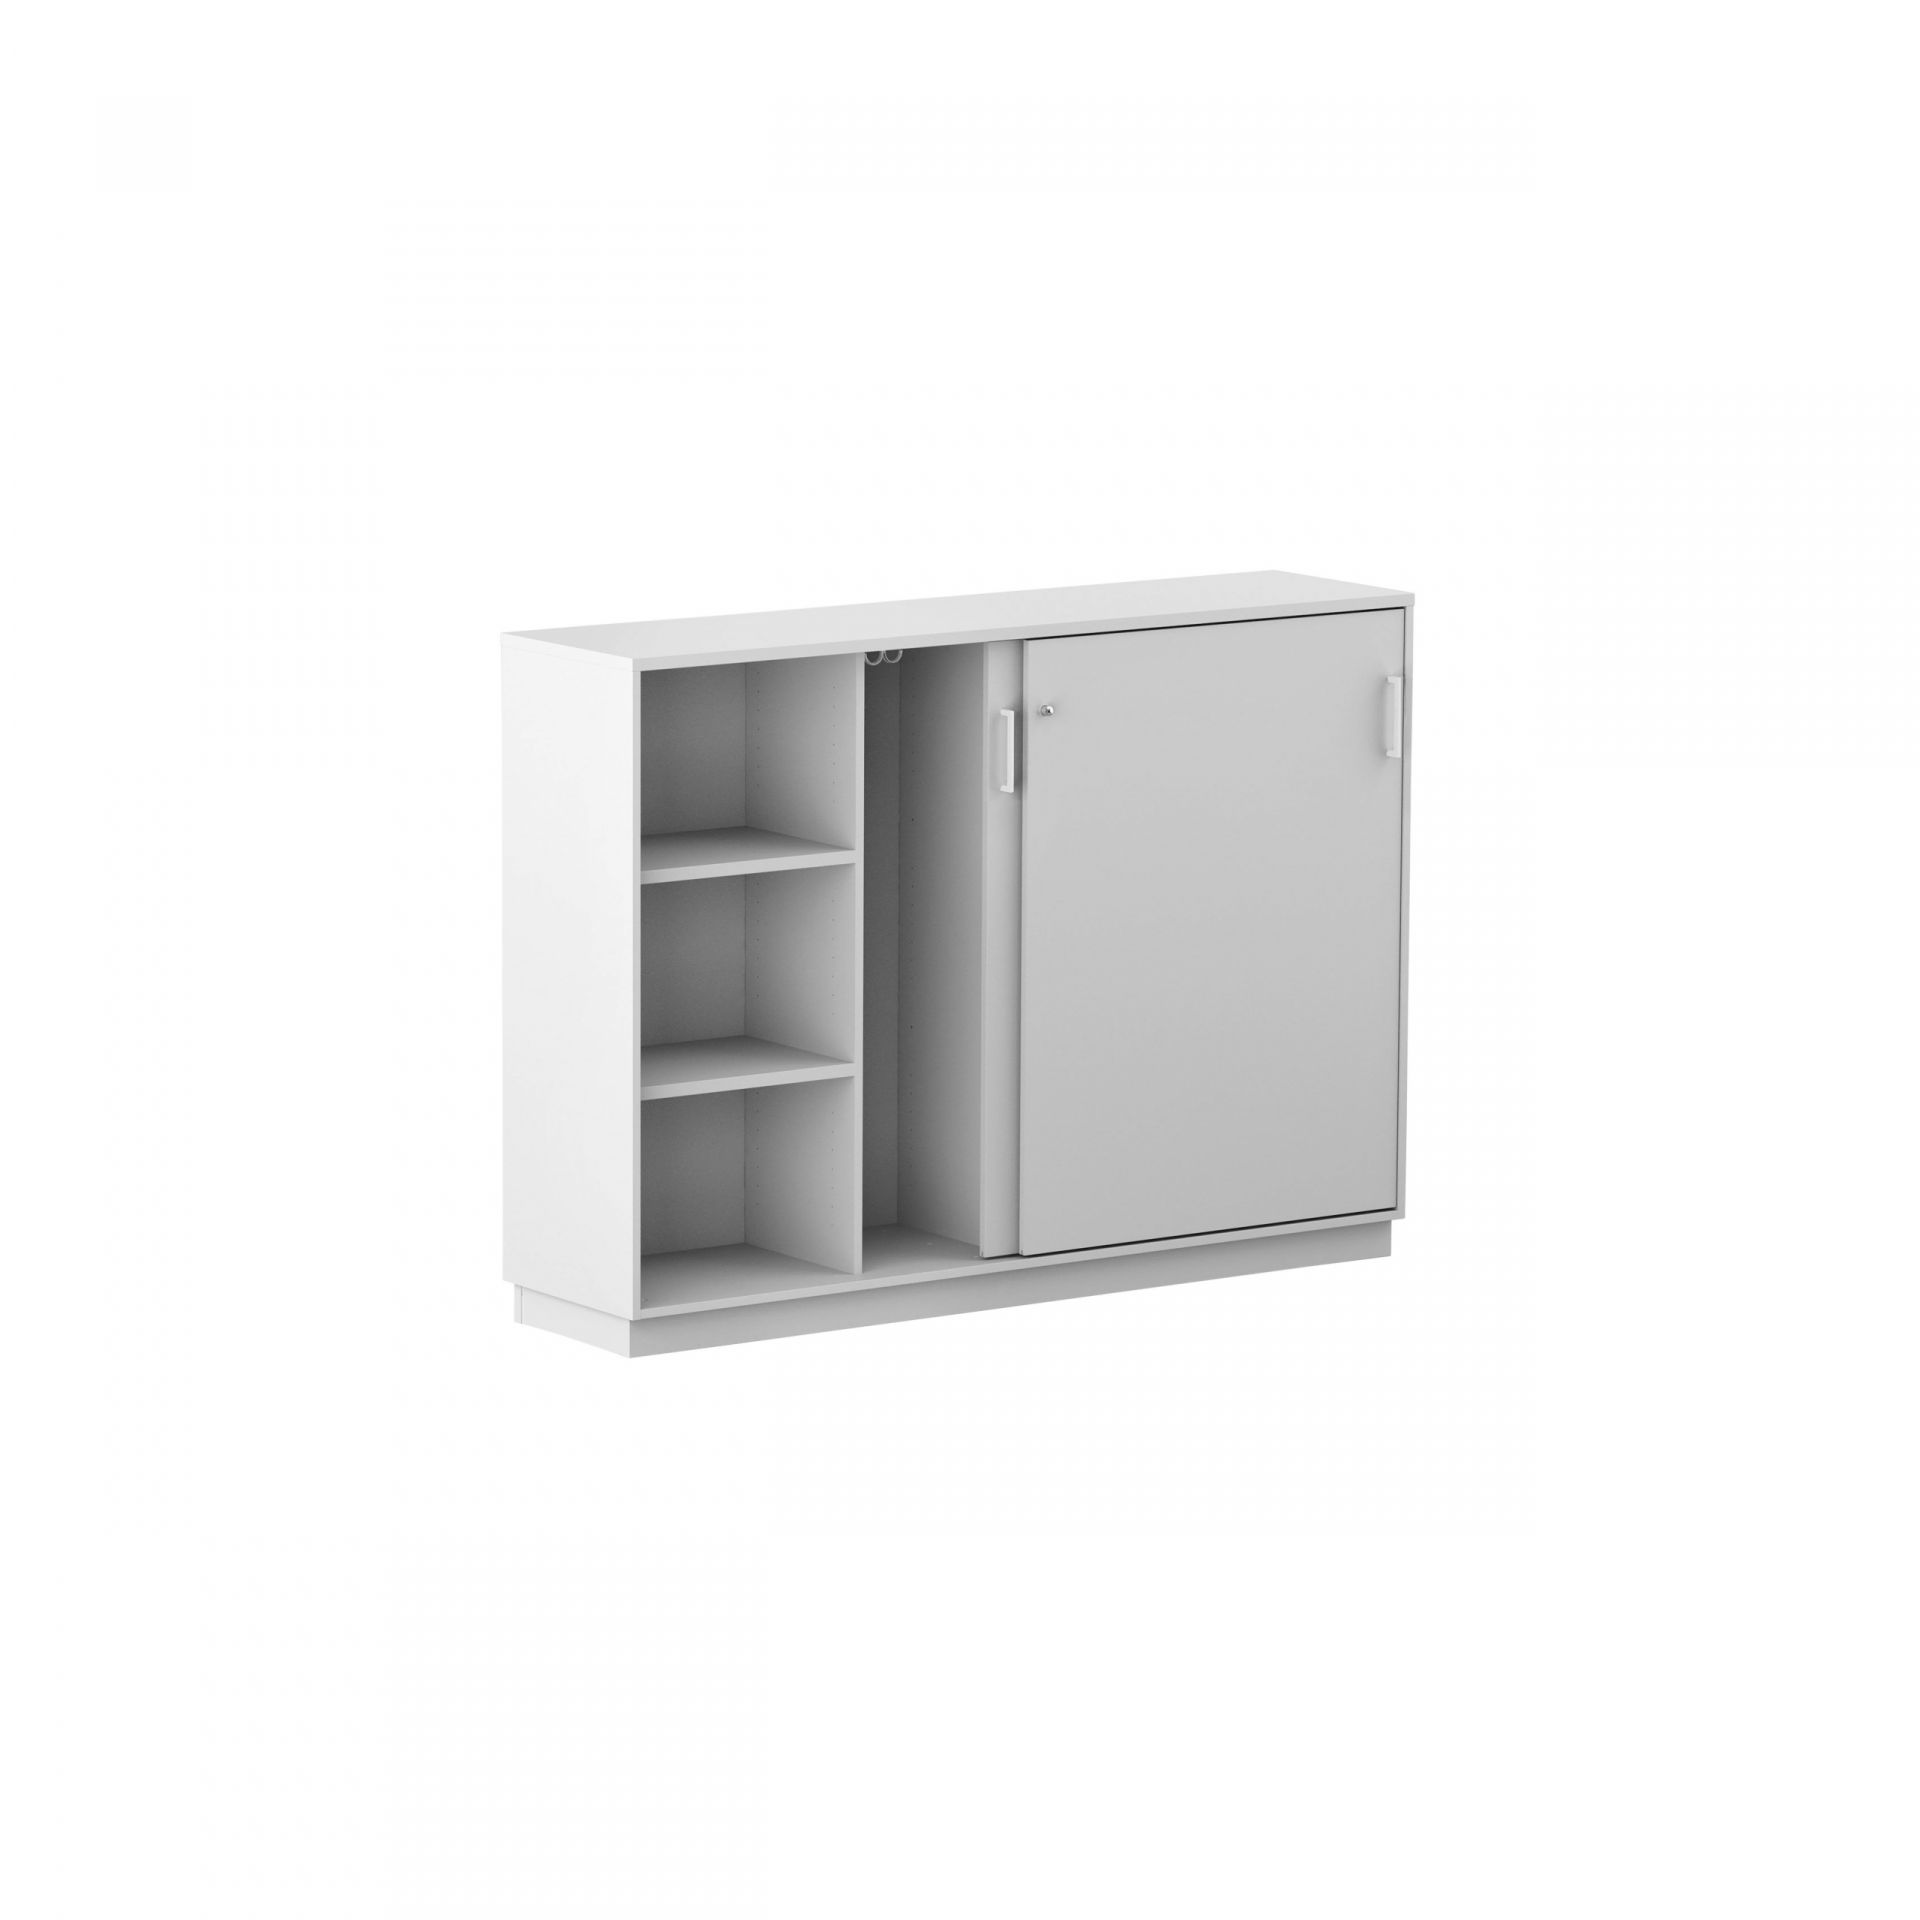 Hold Sliding-door cabinet product image 2